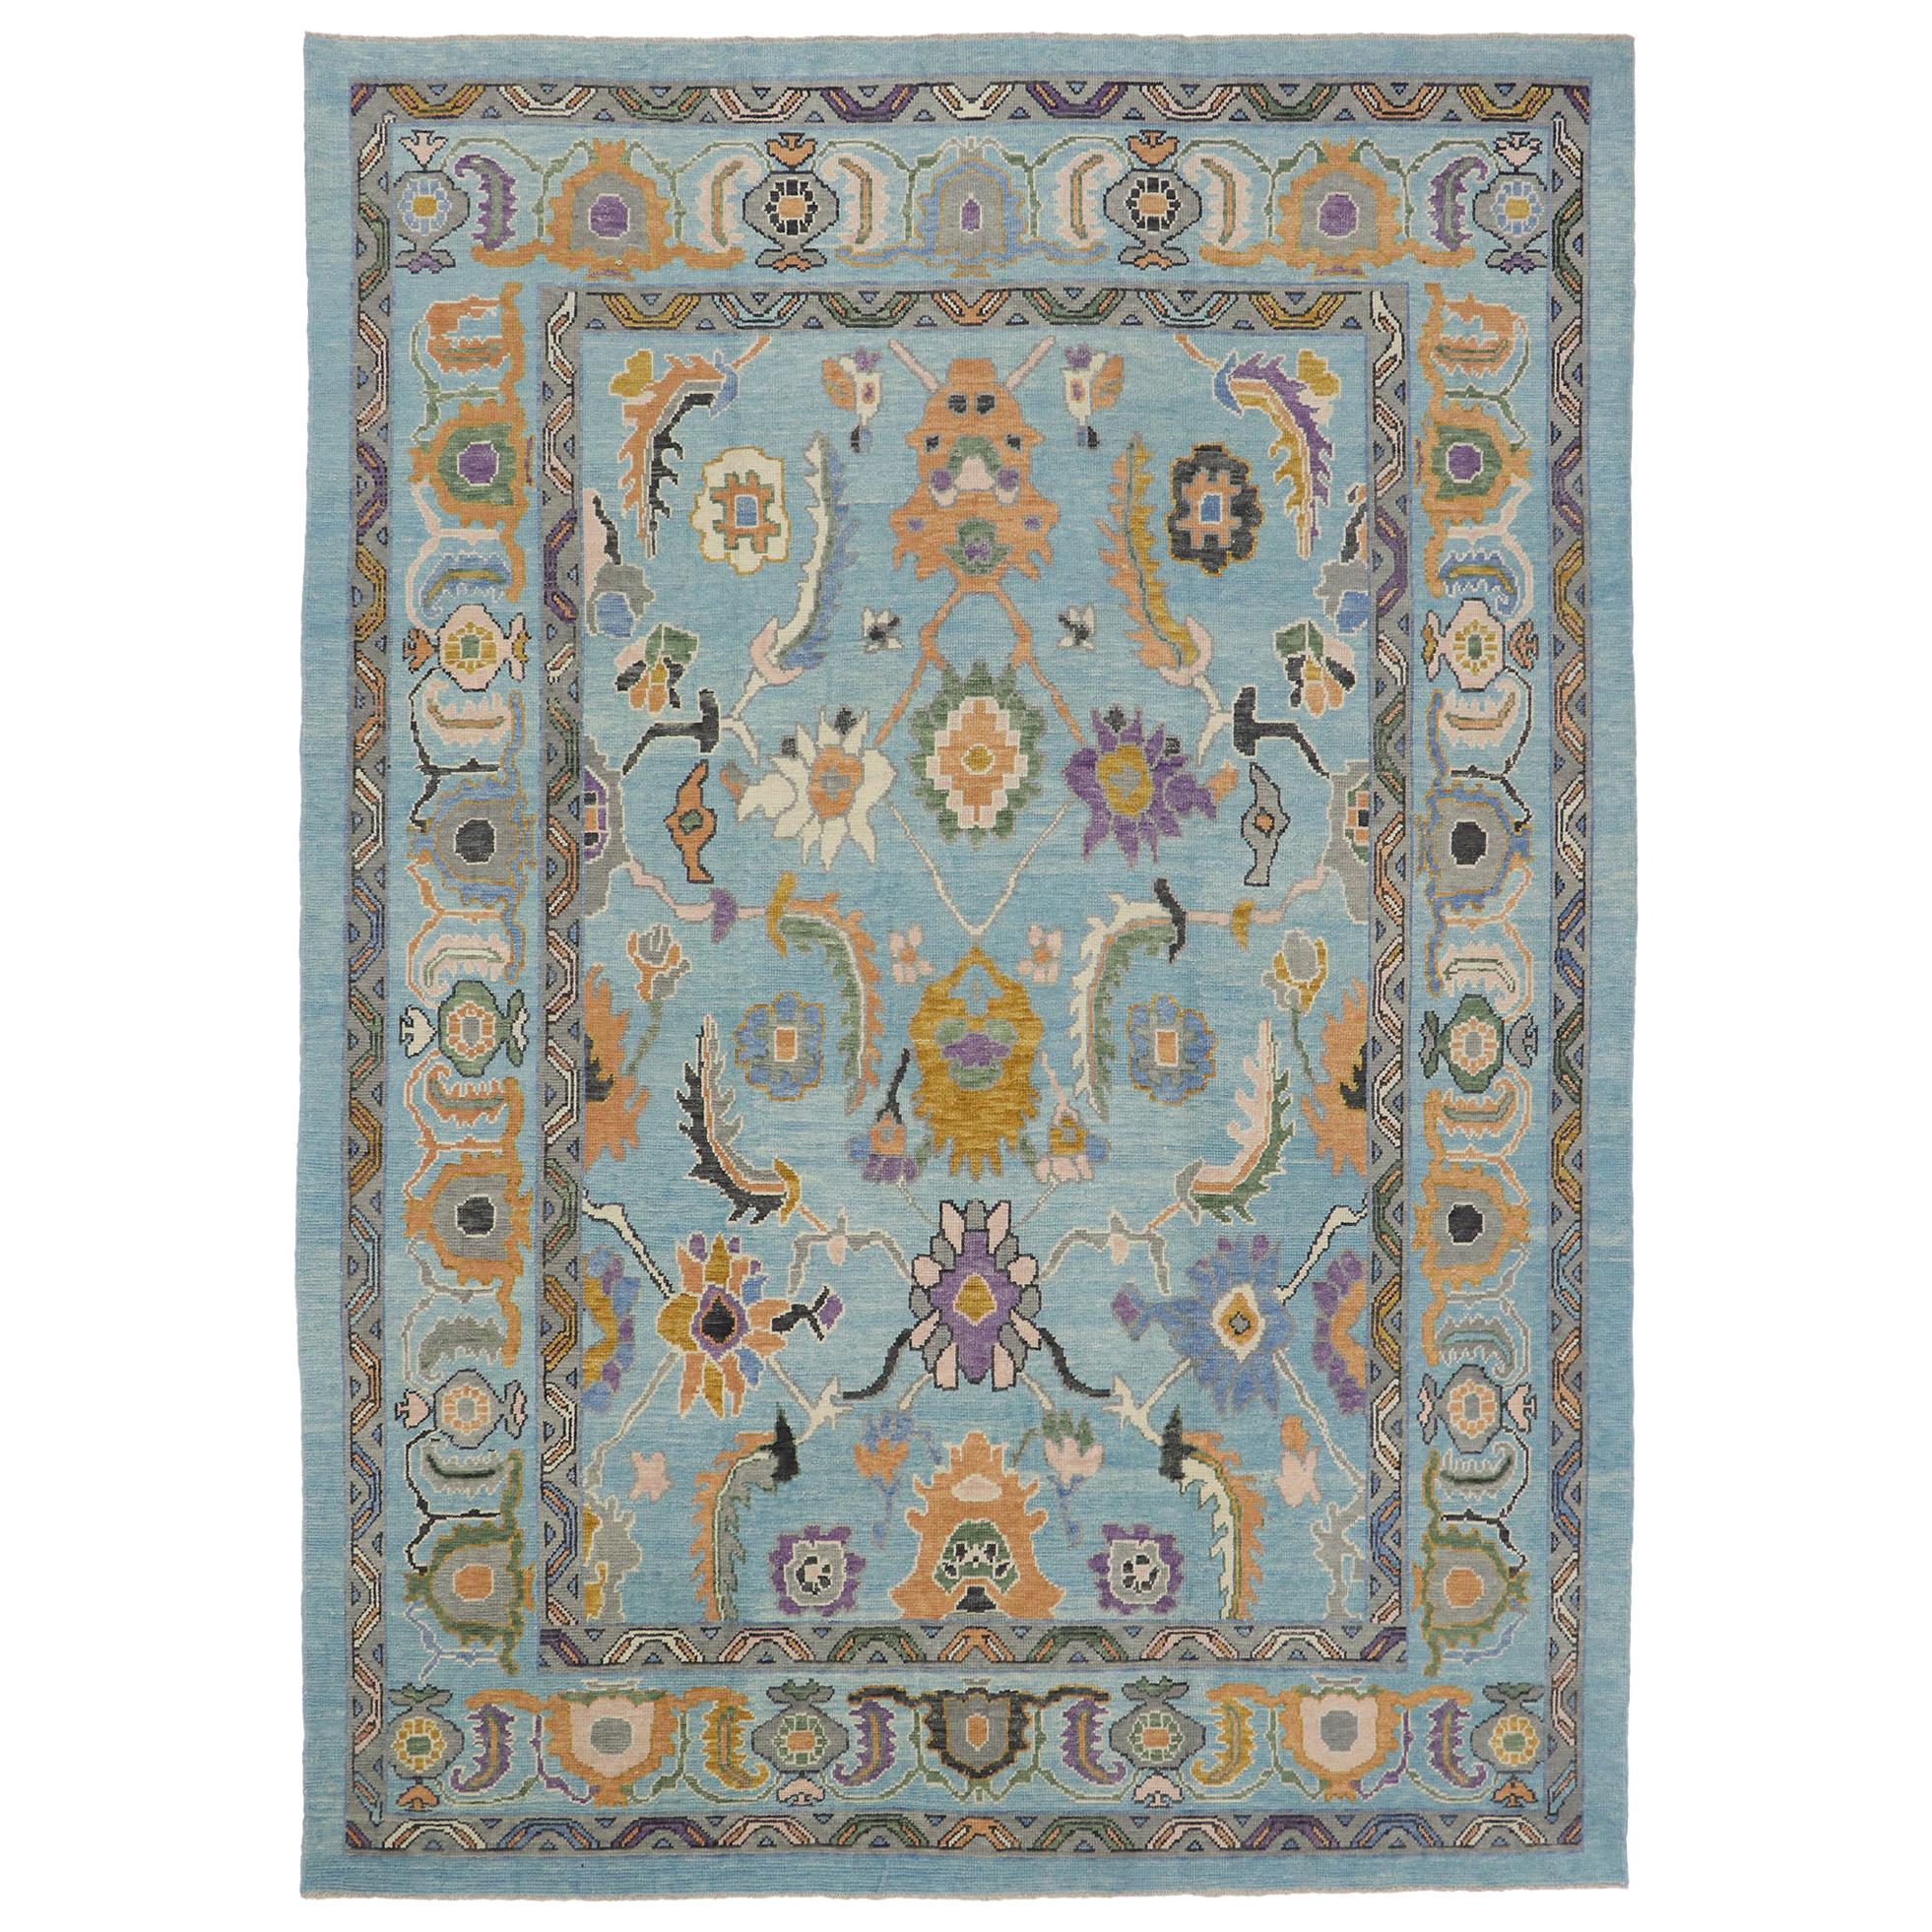 New Contemporary Colorful Turkish Oushak Rug with Eclectic Parisian Style